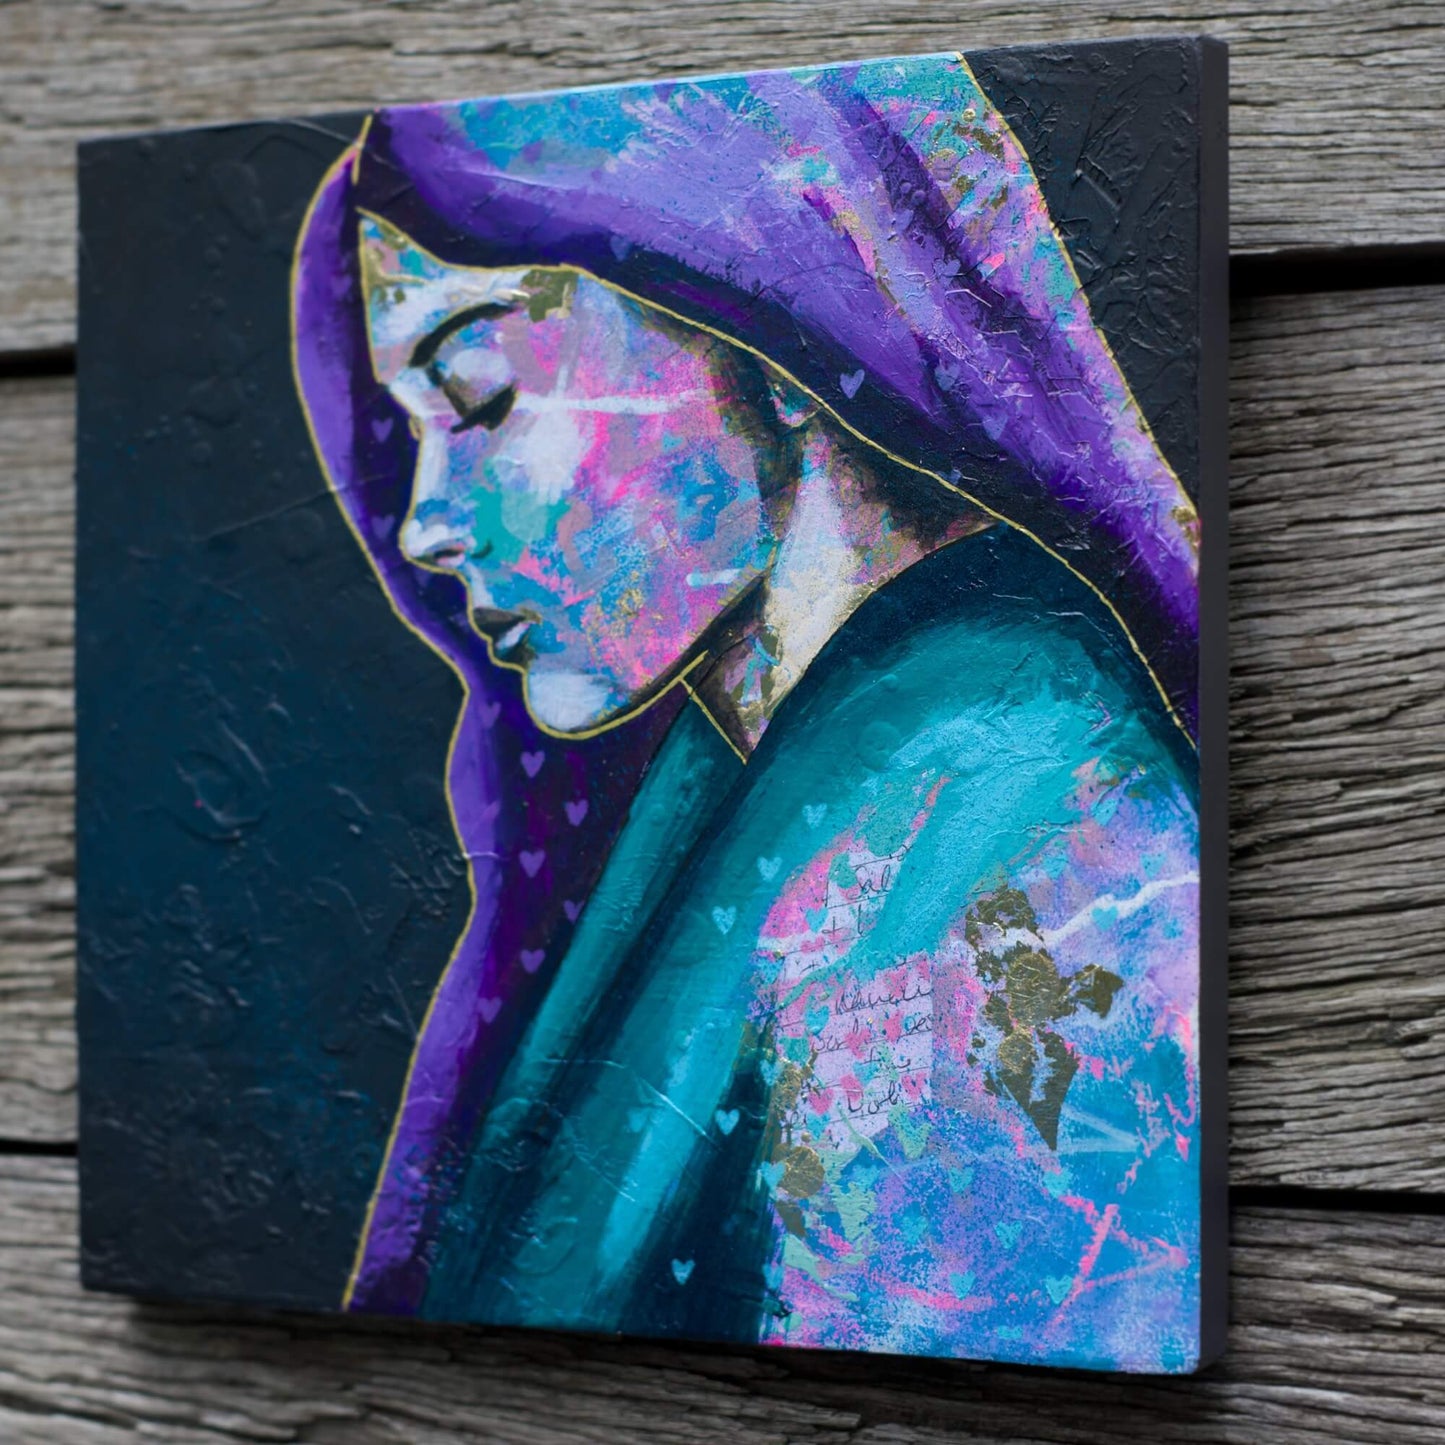 Artwork for Sale – Mini Painting of Woman -Green Purple & Gold  - 'Blue Moon' – Art Wall Painting Criss Chaney